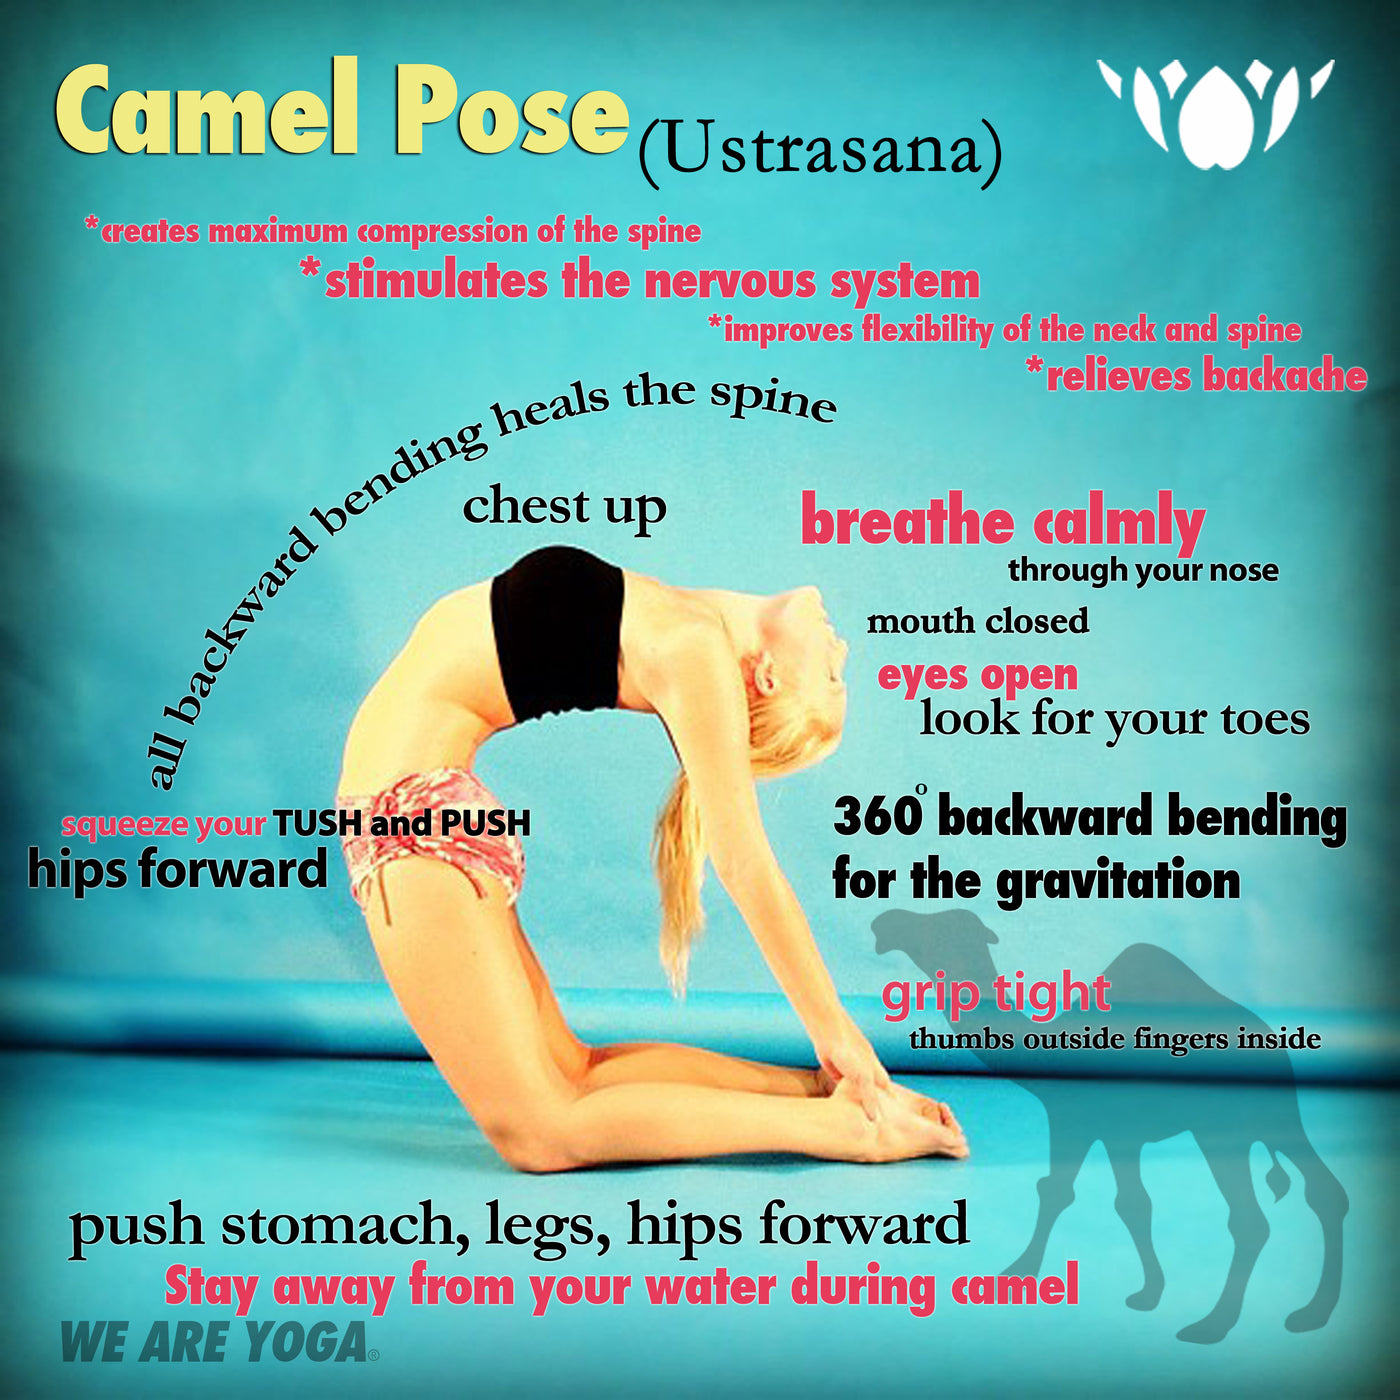 Yoga Love on Instagram: “How to prepare for Ustrasana Camel pose is a deep  backbend and it can feel challenging … | Yoga poses for back, Camel pose, Camel  pose yoga